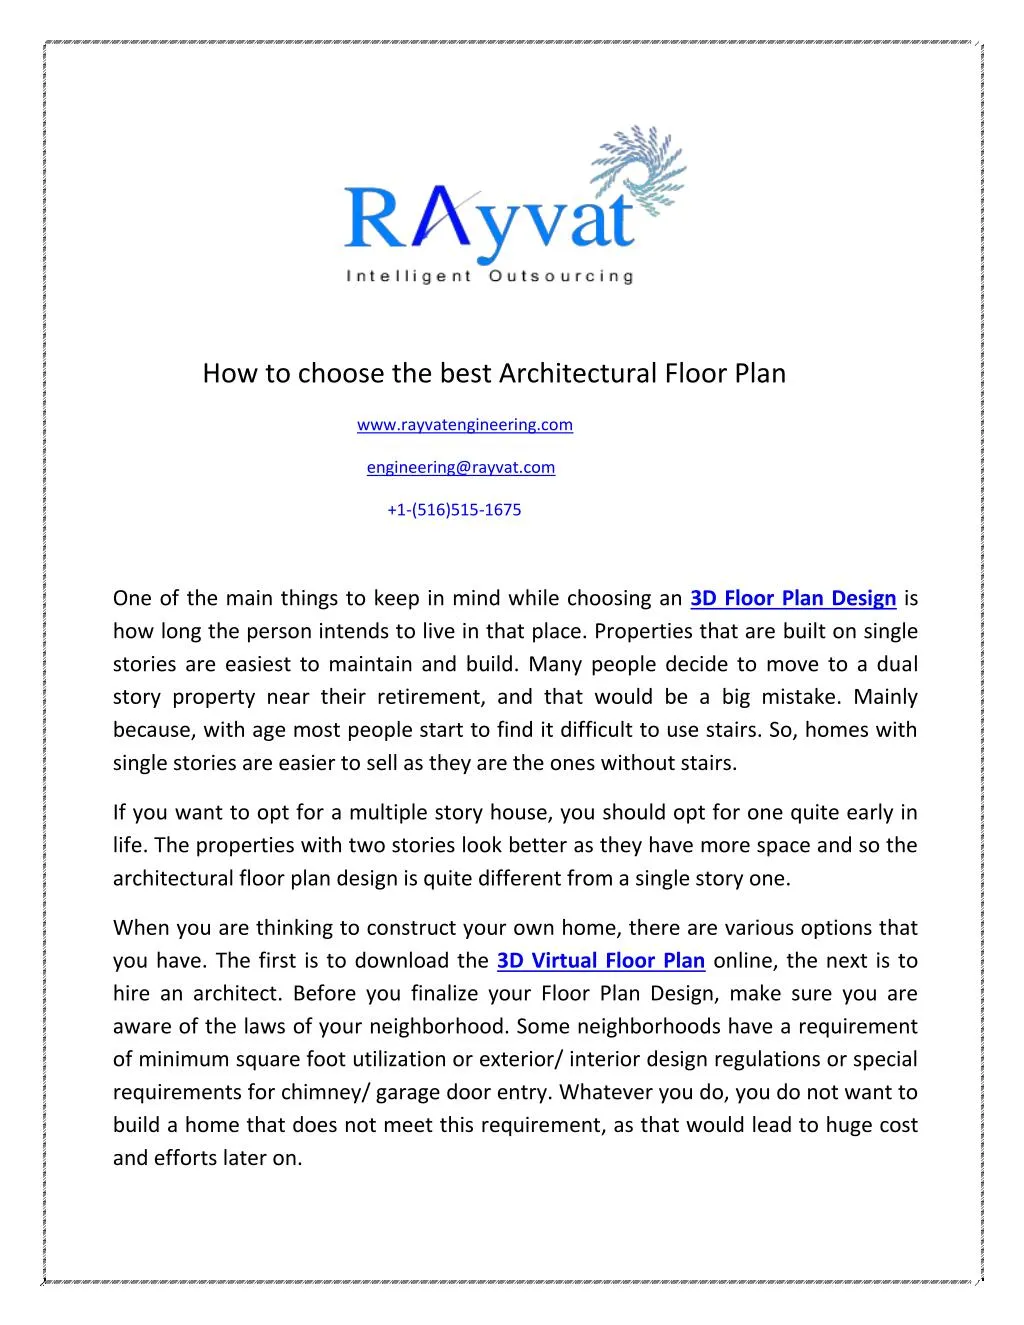 how to choose the best architectural floor plan